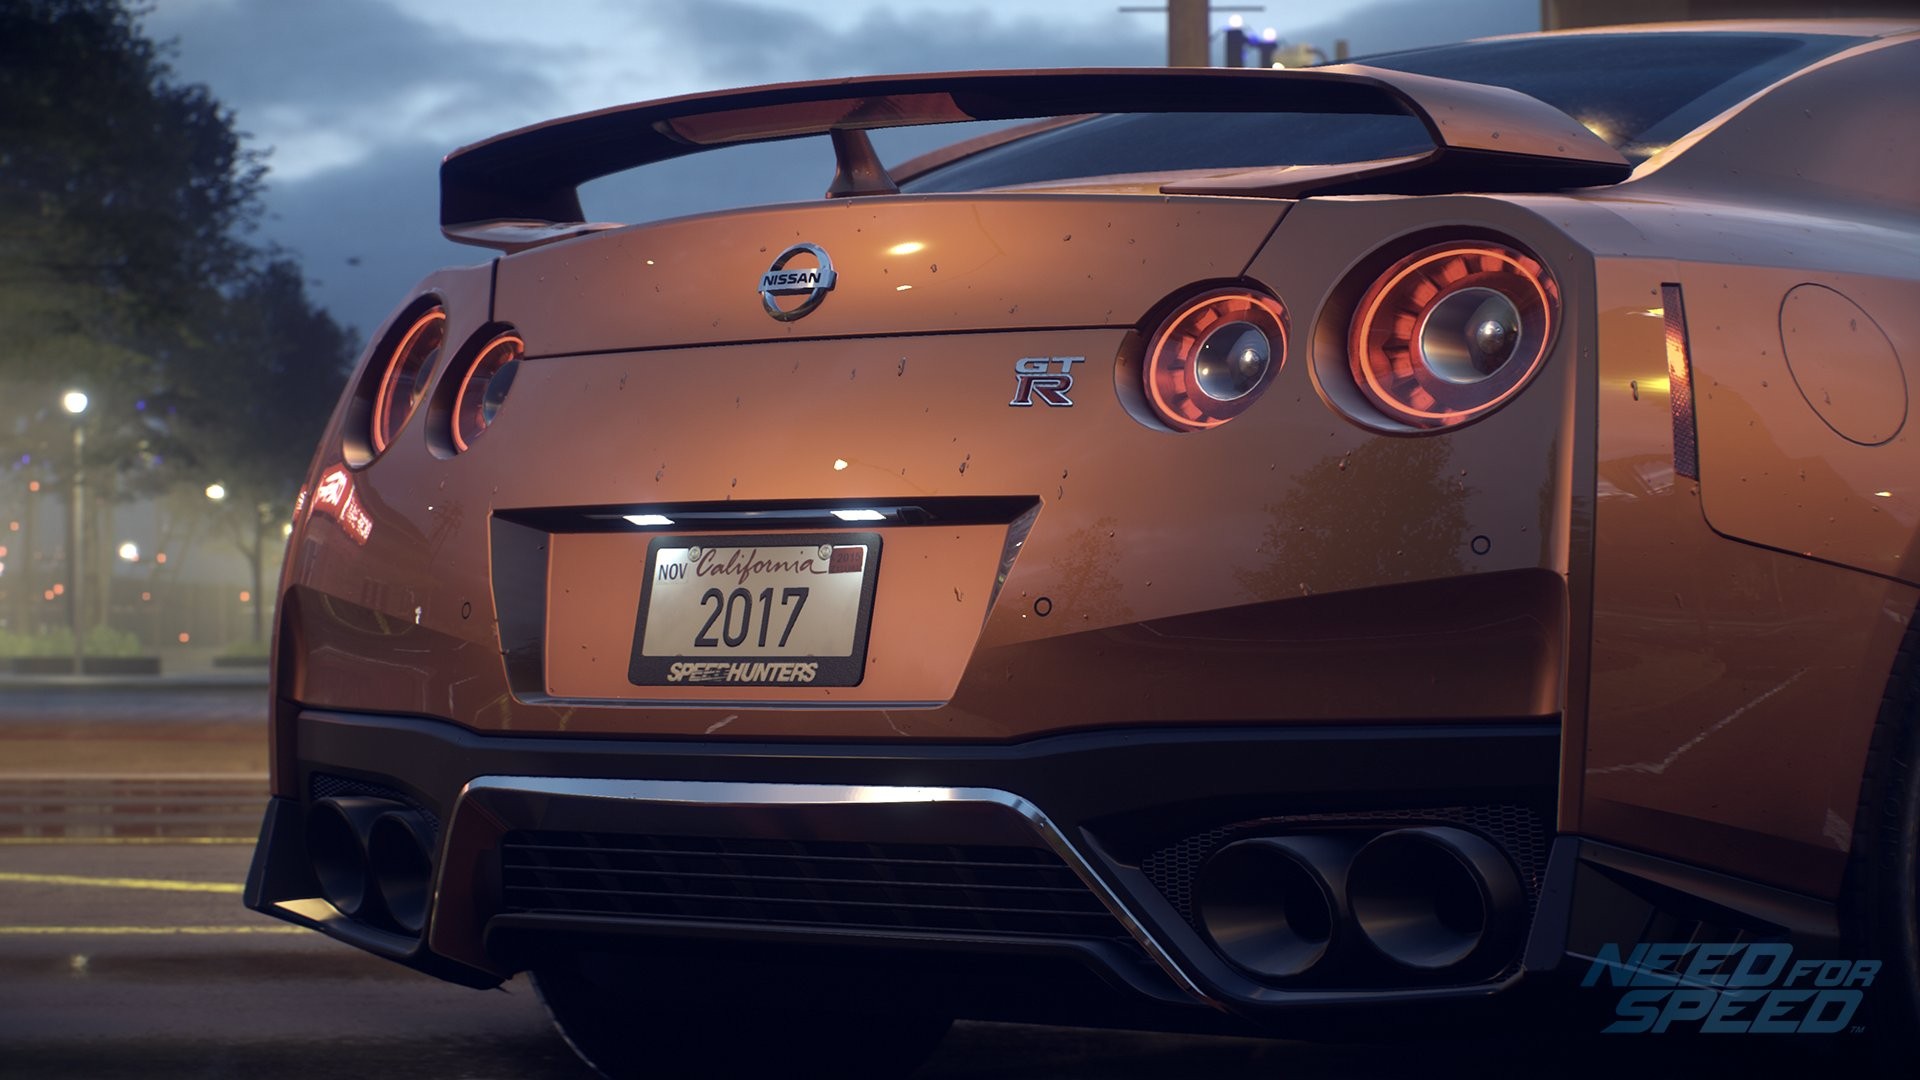 need For Speed 2016, Need For Speed, Car, PC Gaming, Nissan, Nissan GTR Wallpaper